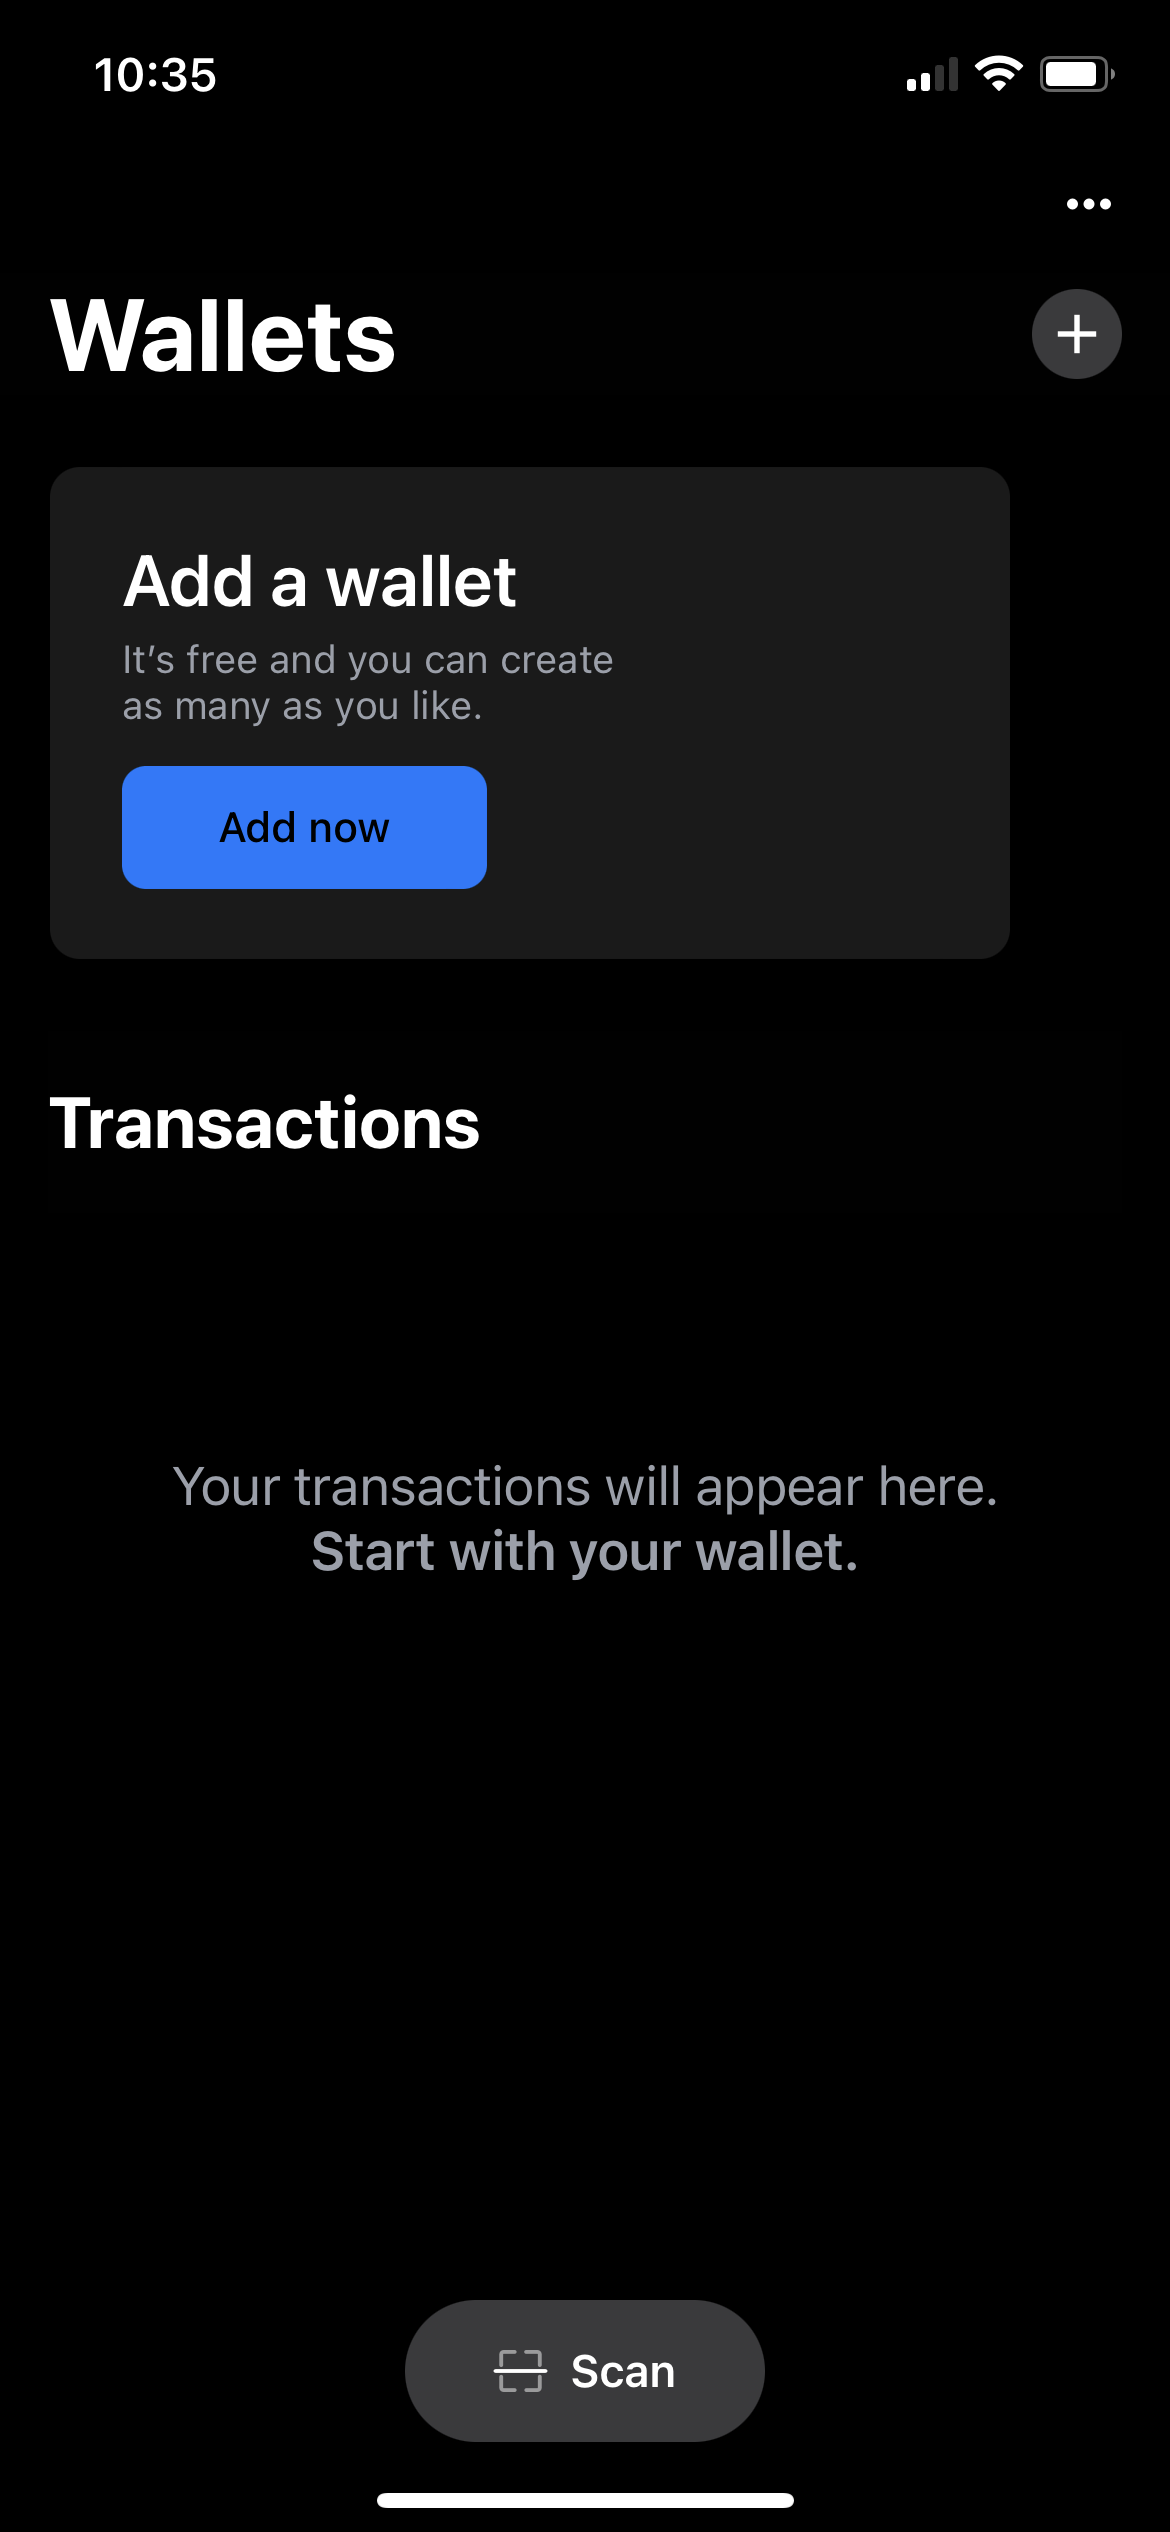 How to get a paper wallet